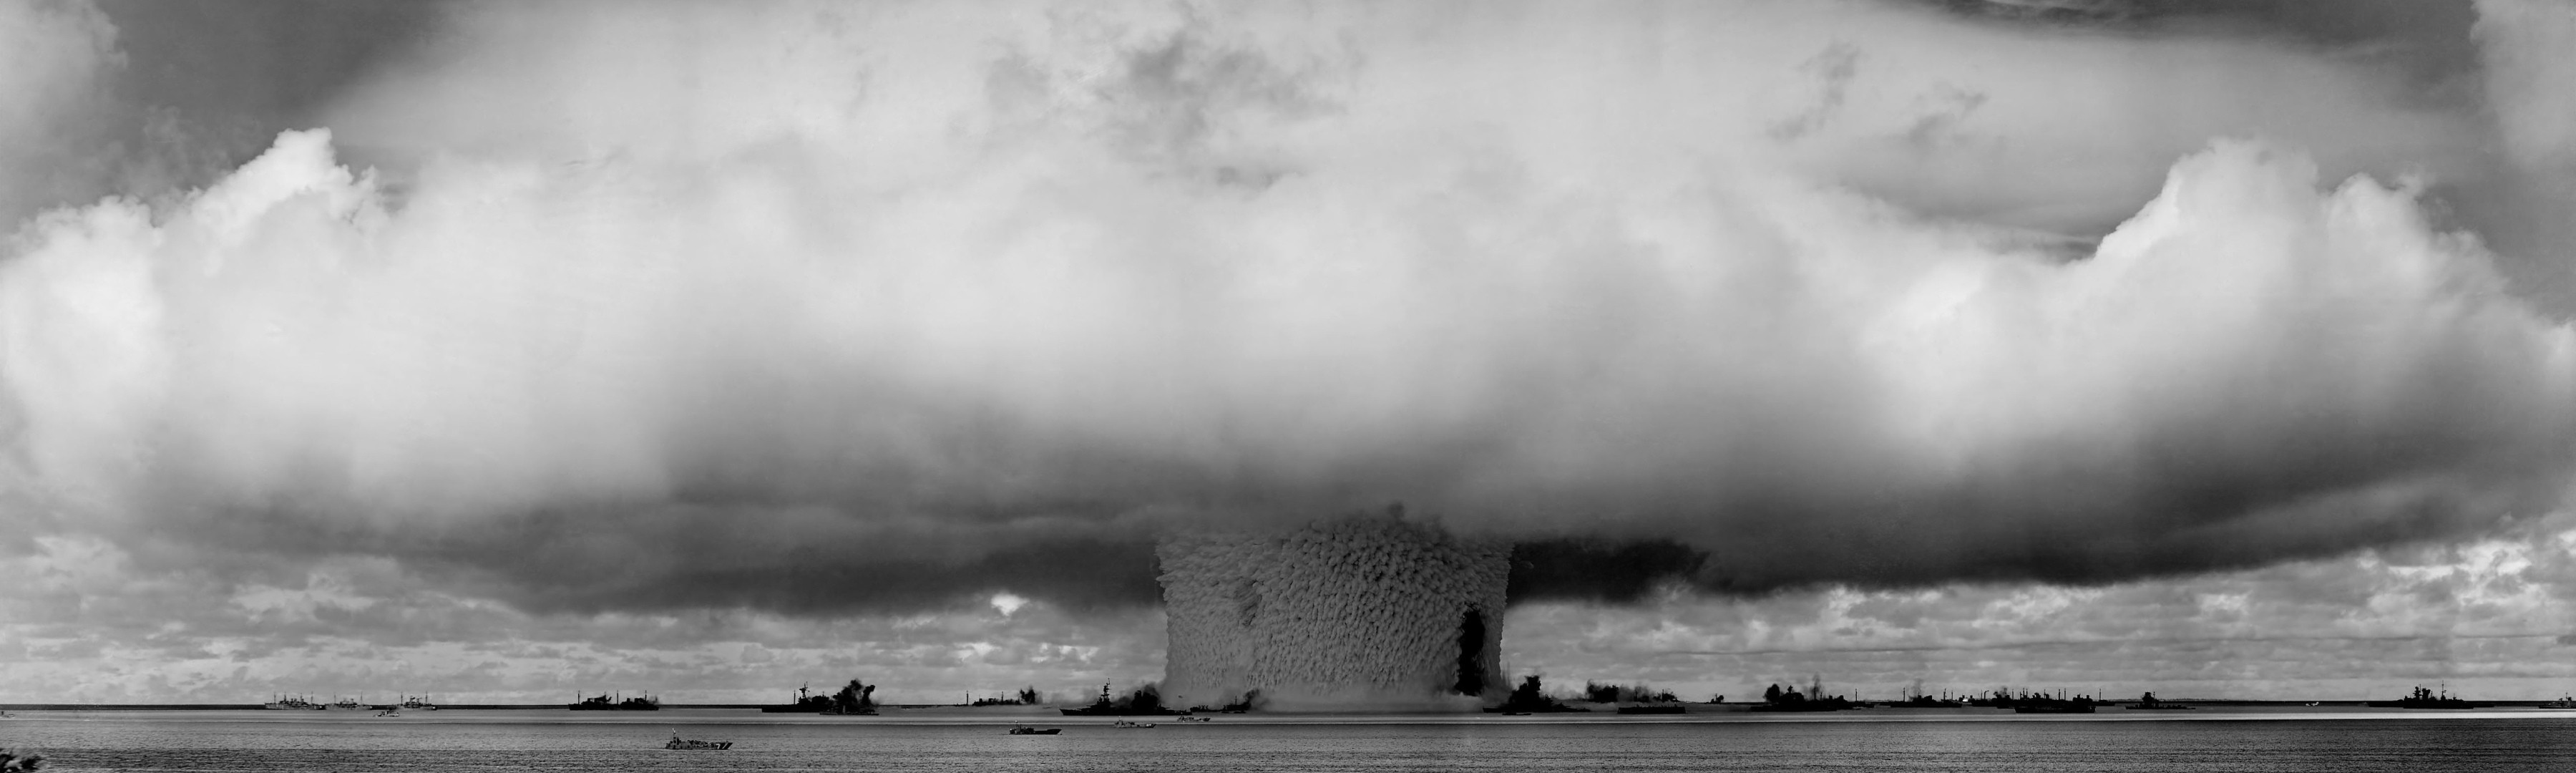 Atomic Bomb Monochrome History Explosion Nuclear 3600x1080